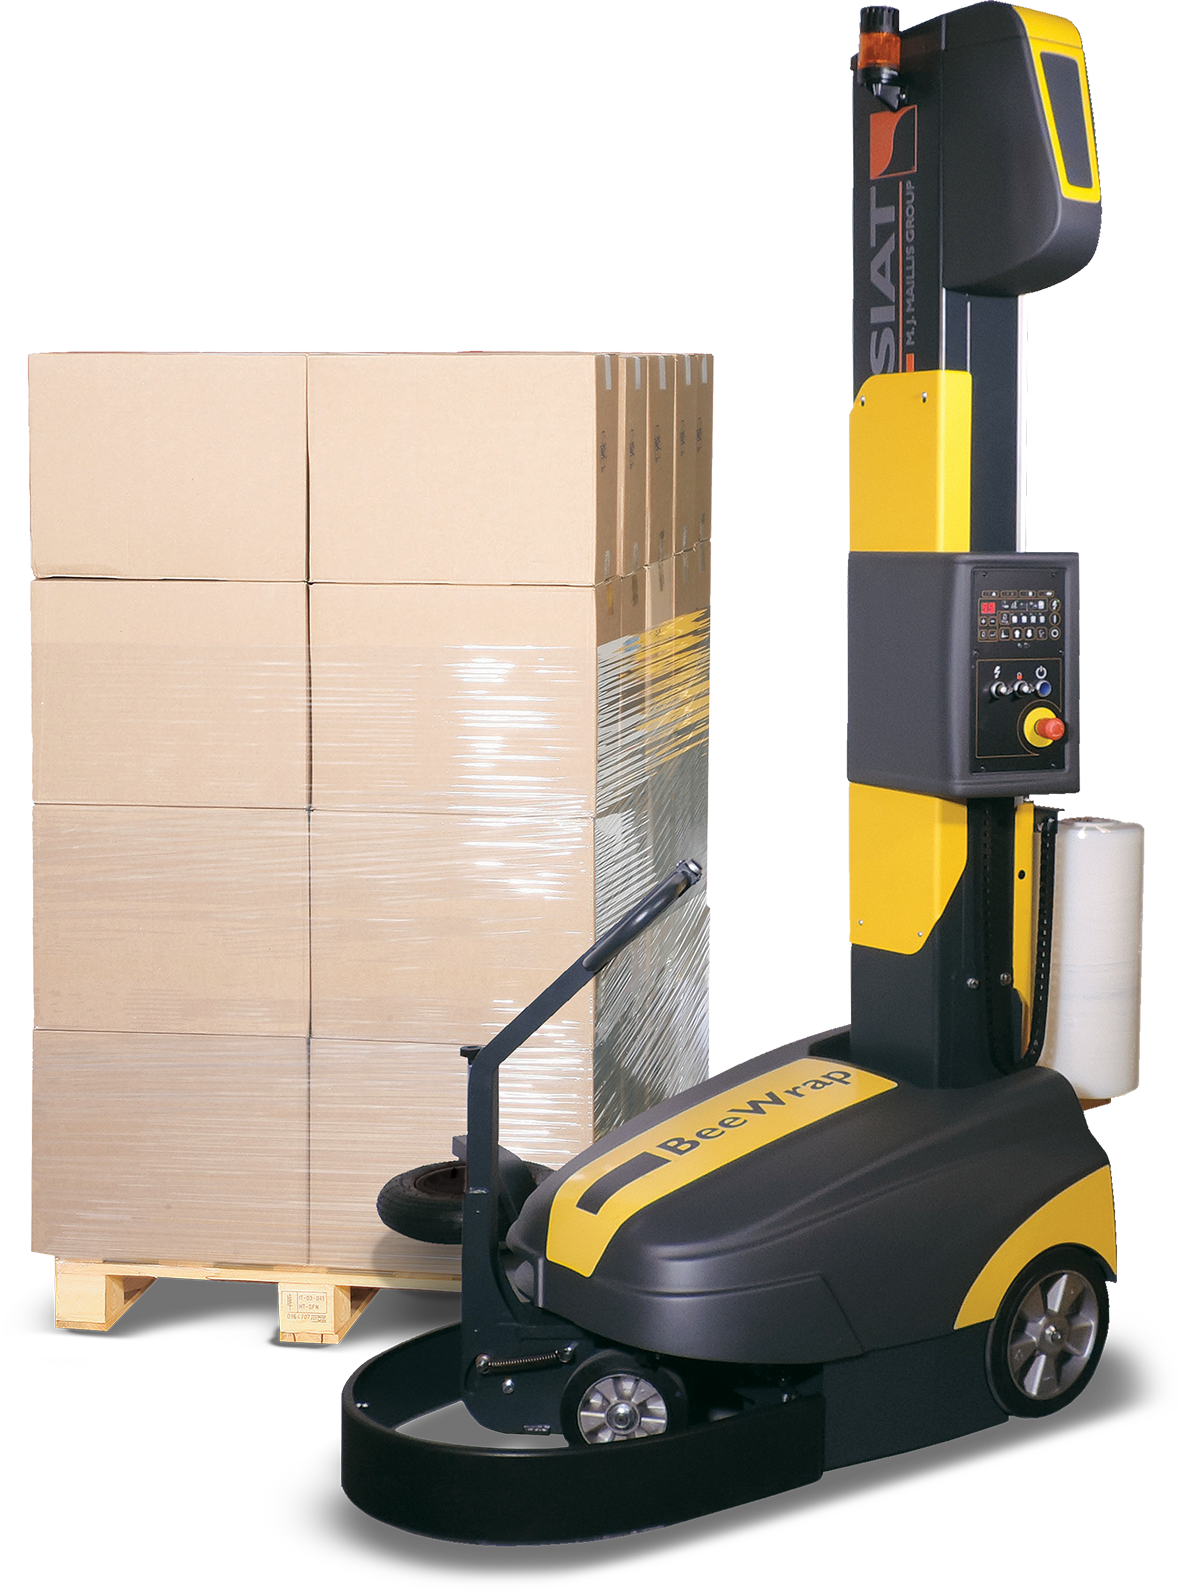 Buy Pallet Wrapper Semi-Auto Robotic (Beewrap) in Pallet Wrappers from SIAT available at Astrolift NZ